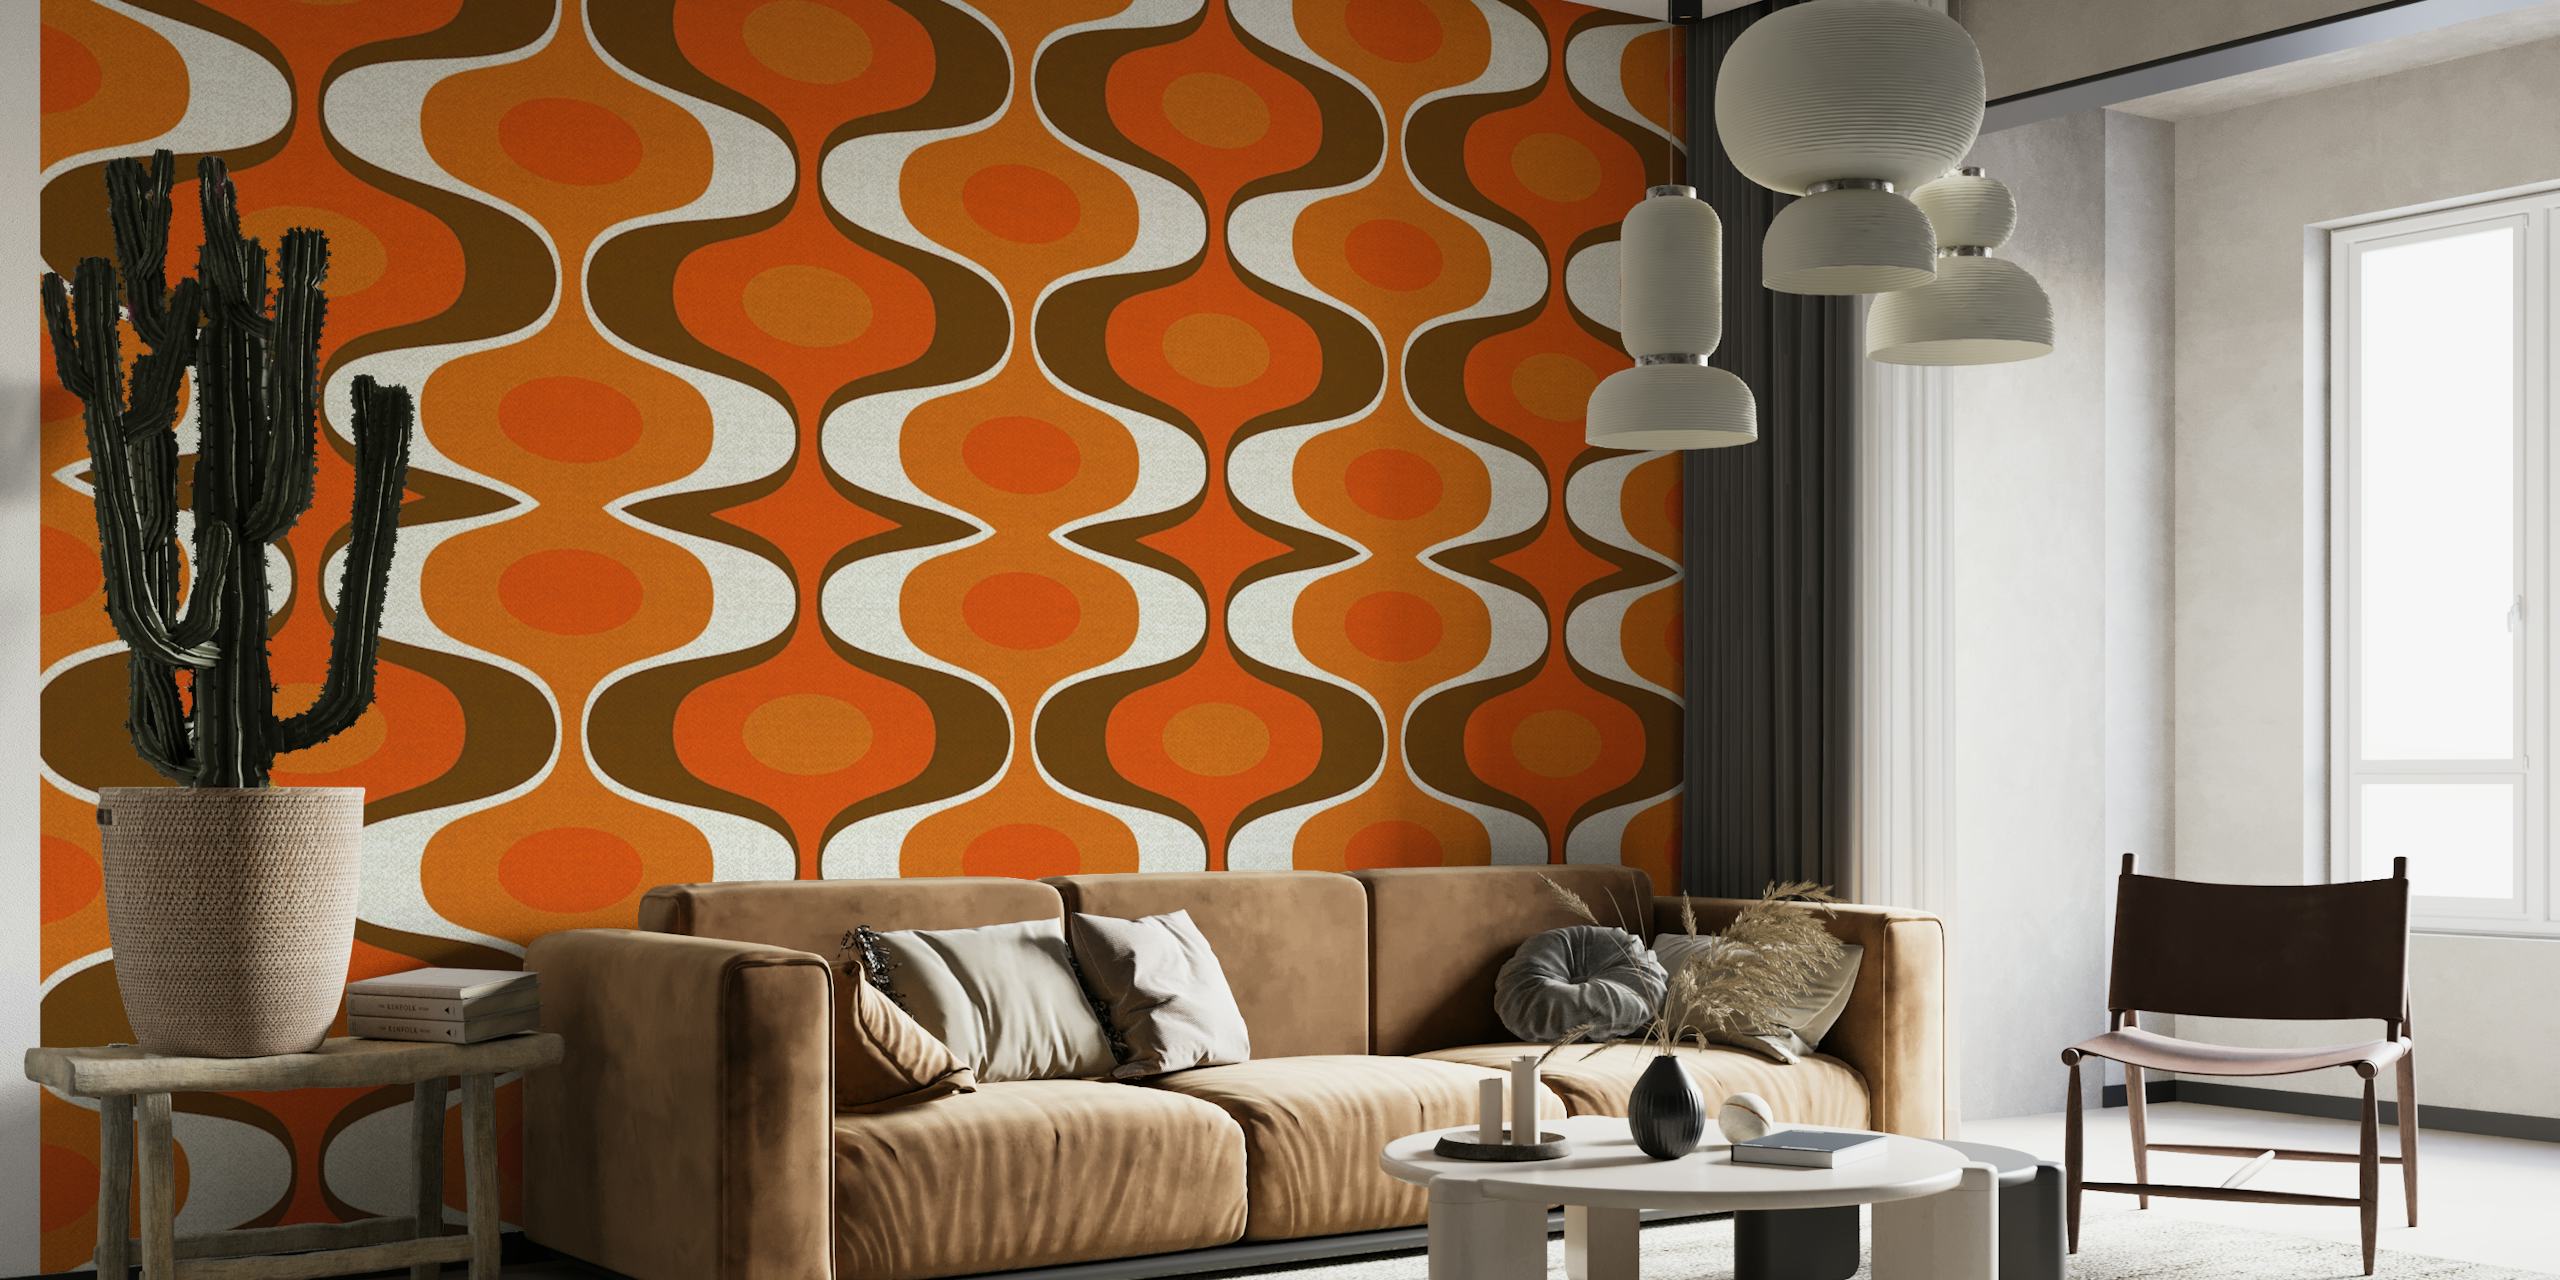 Vintage-inspired wall mural with a 70s retro groovy pattern in orange and brown colors.